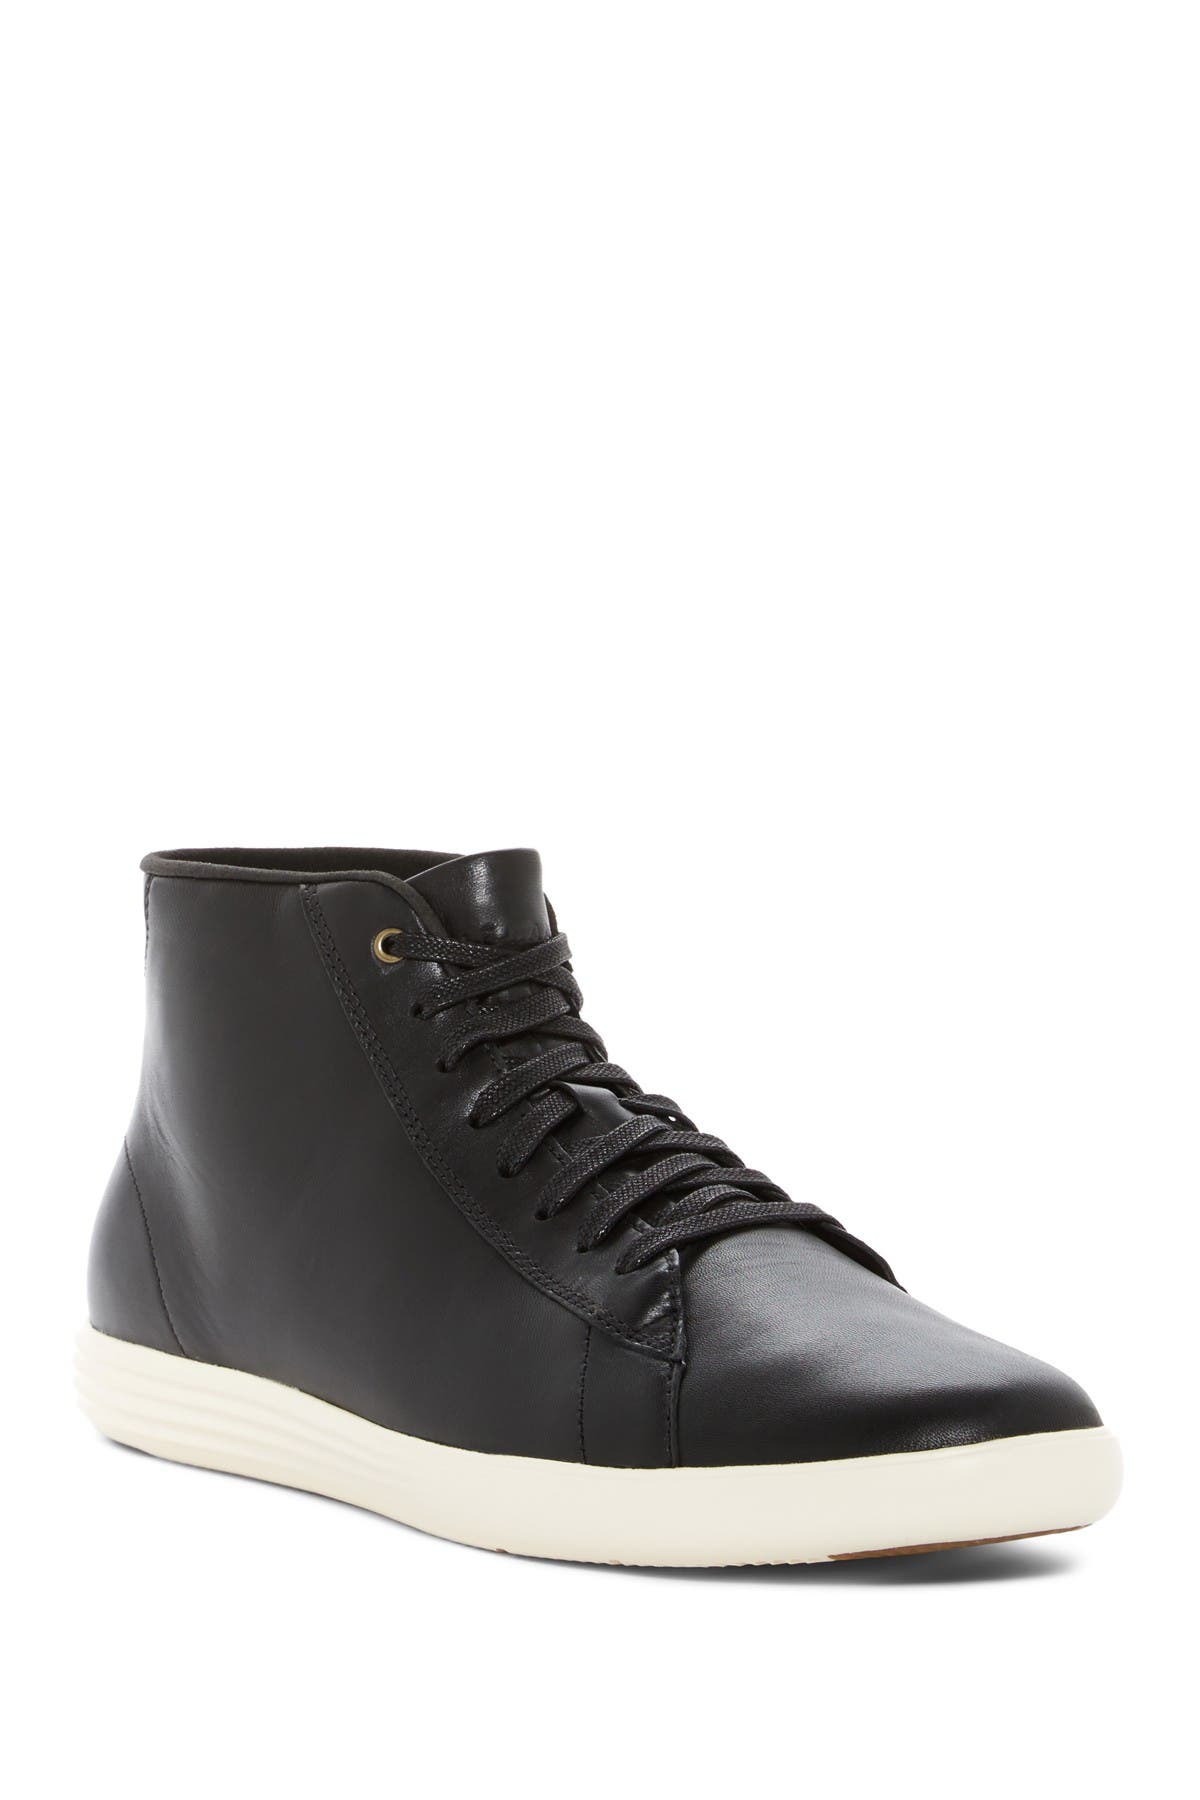 Cole Haan | Grand Crosscourt Leather 